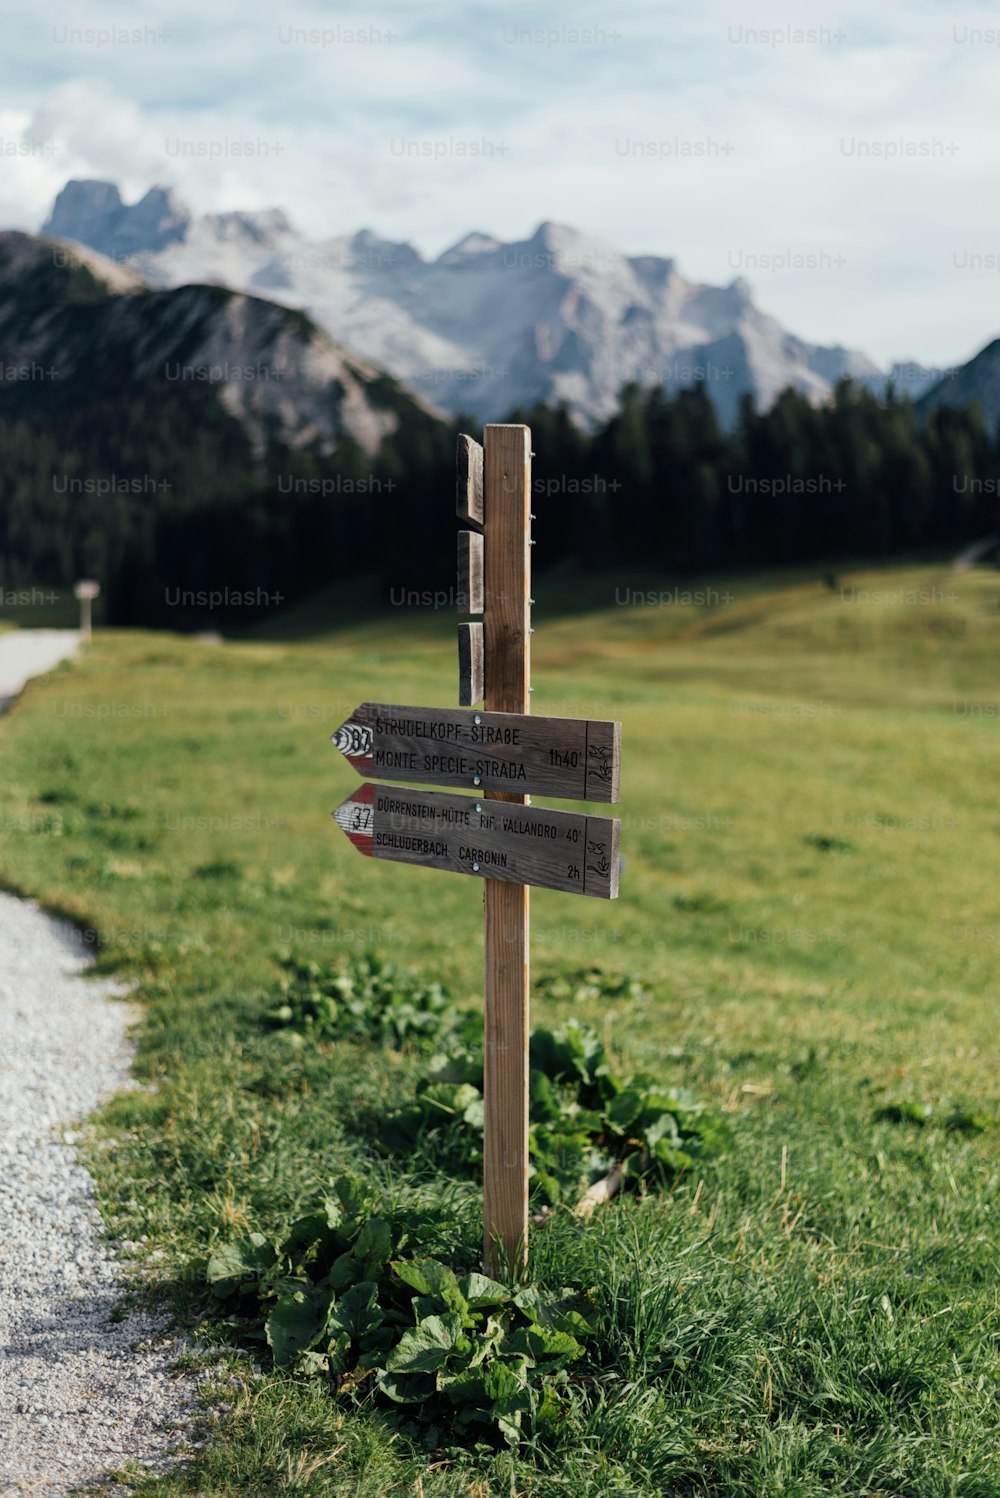 a wooden sign in the middle of a grassy field